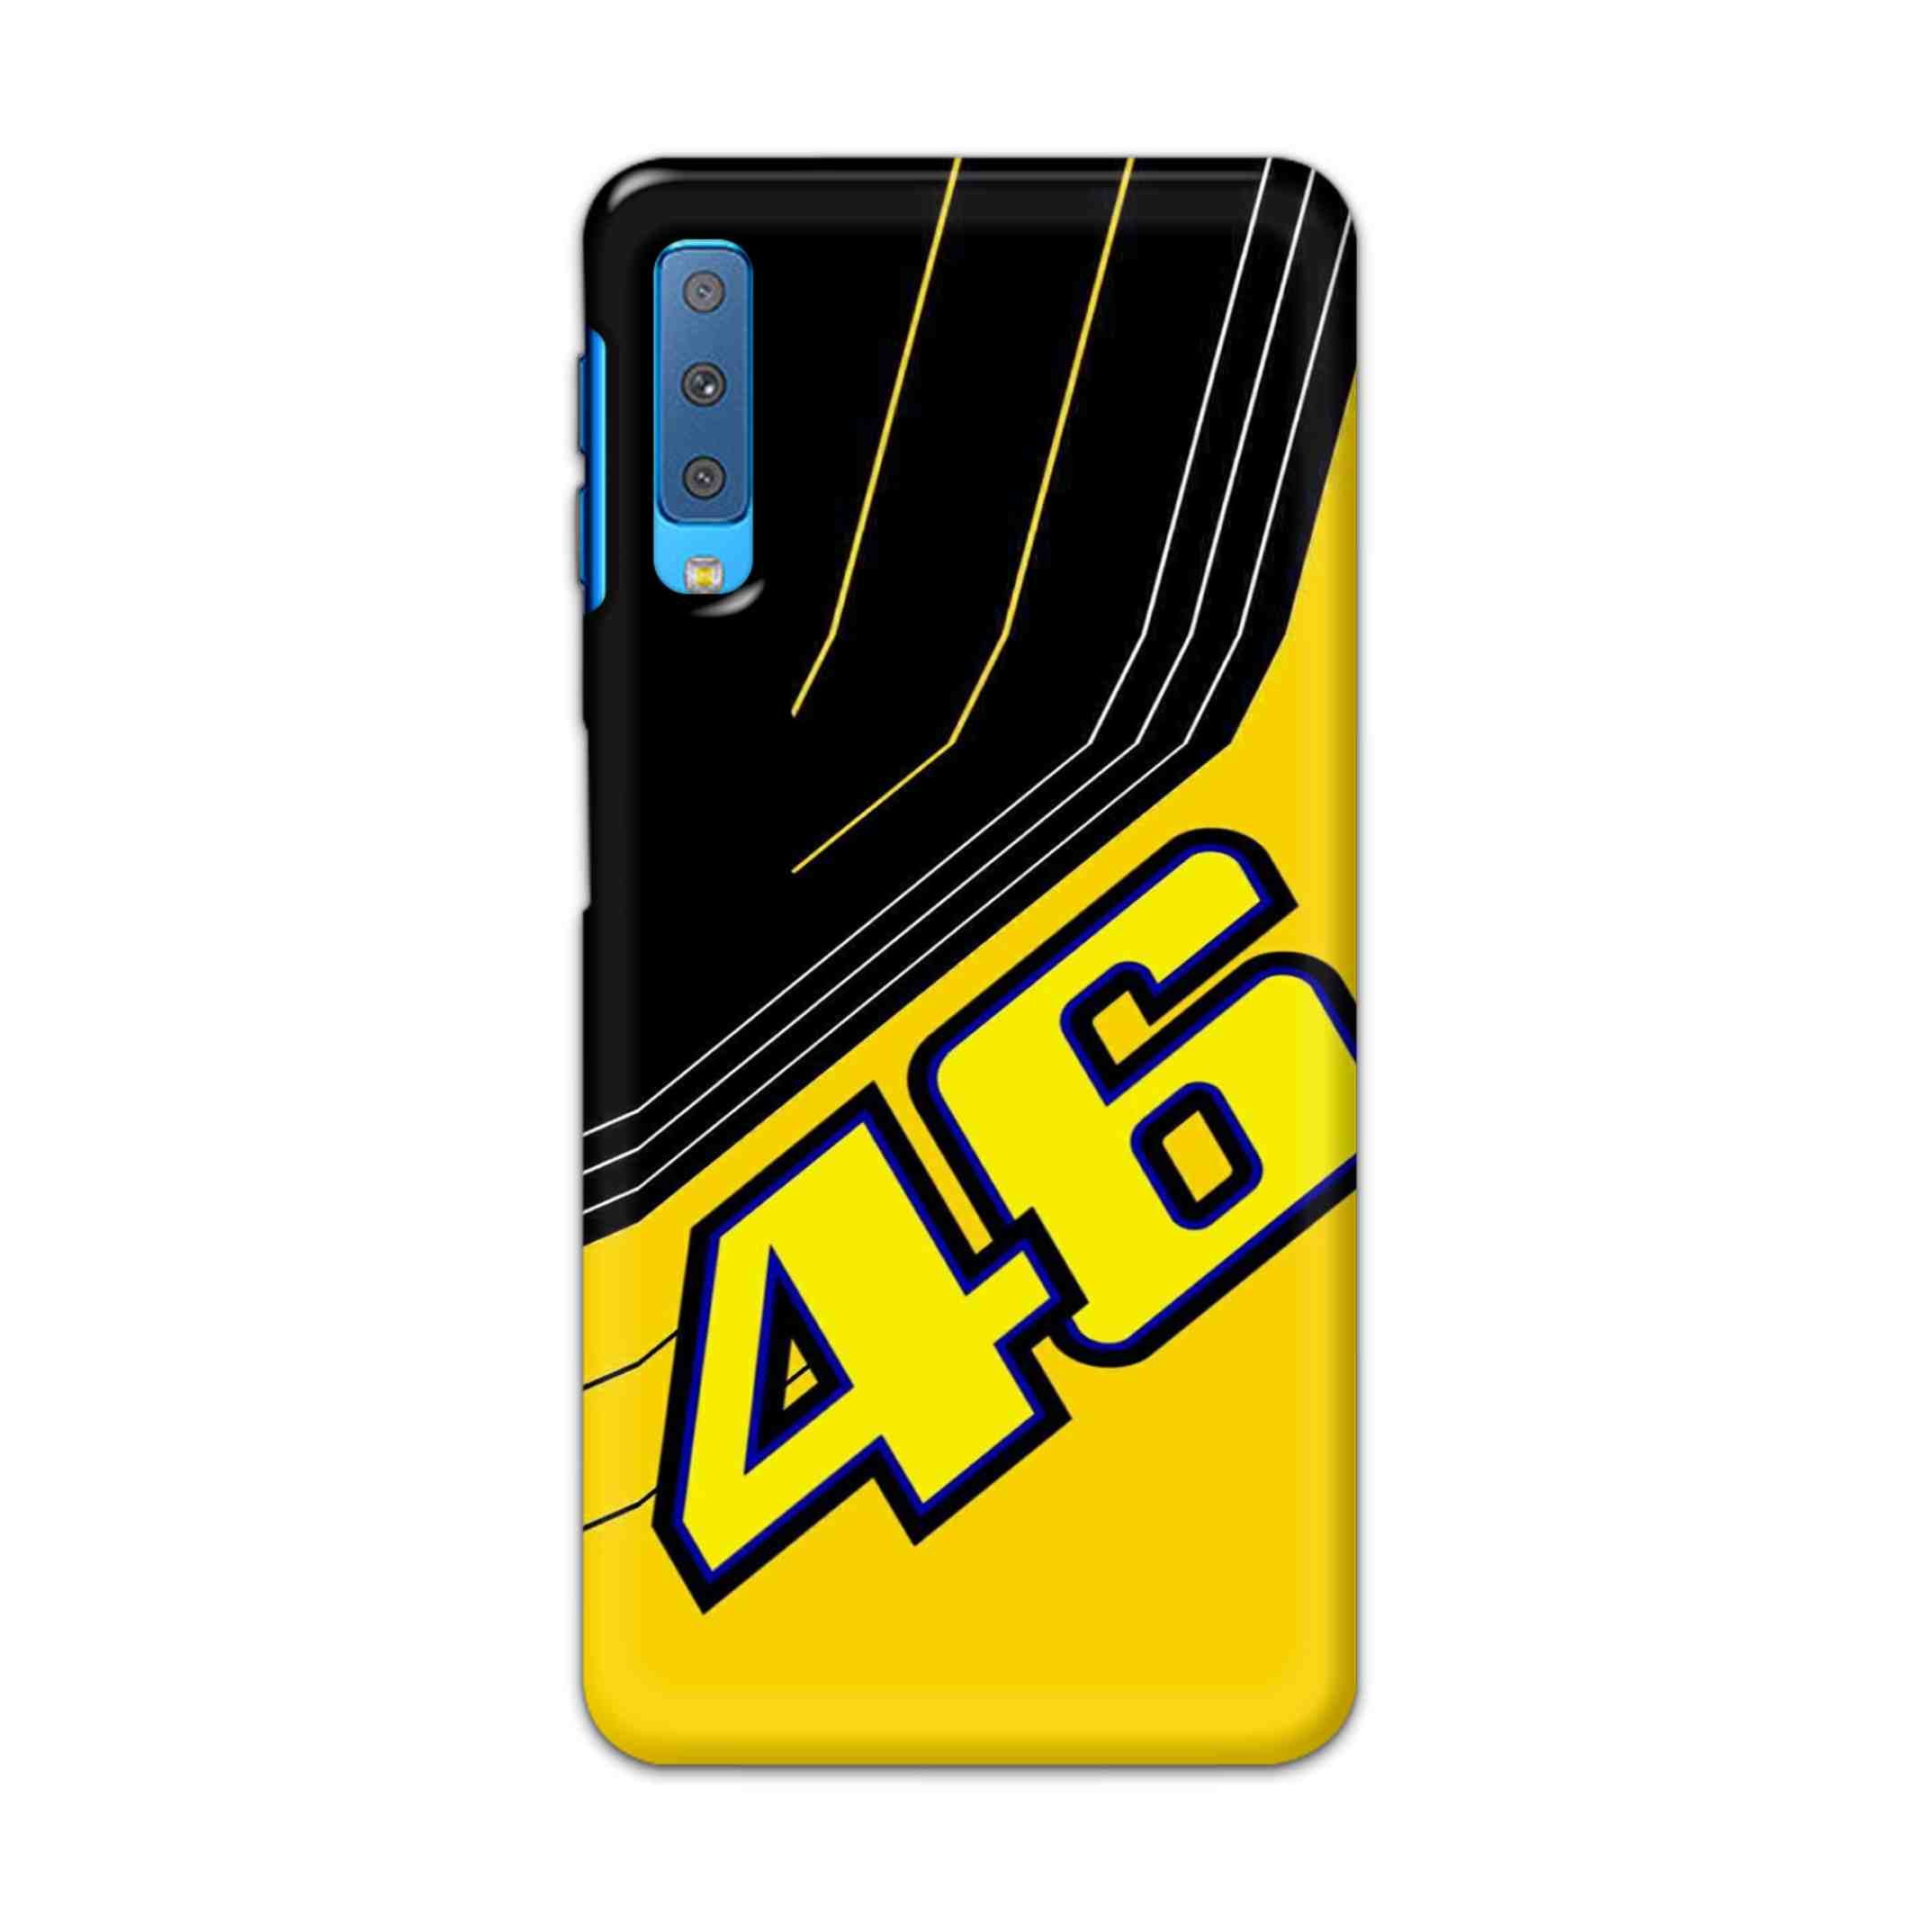 Buy 46 Hard Back Mobile Phone Case Cover For Samsung Galaxy A7 2018 Online